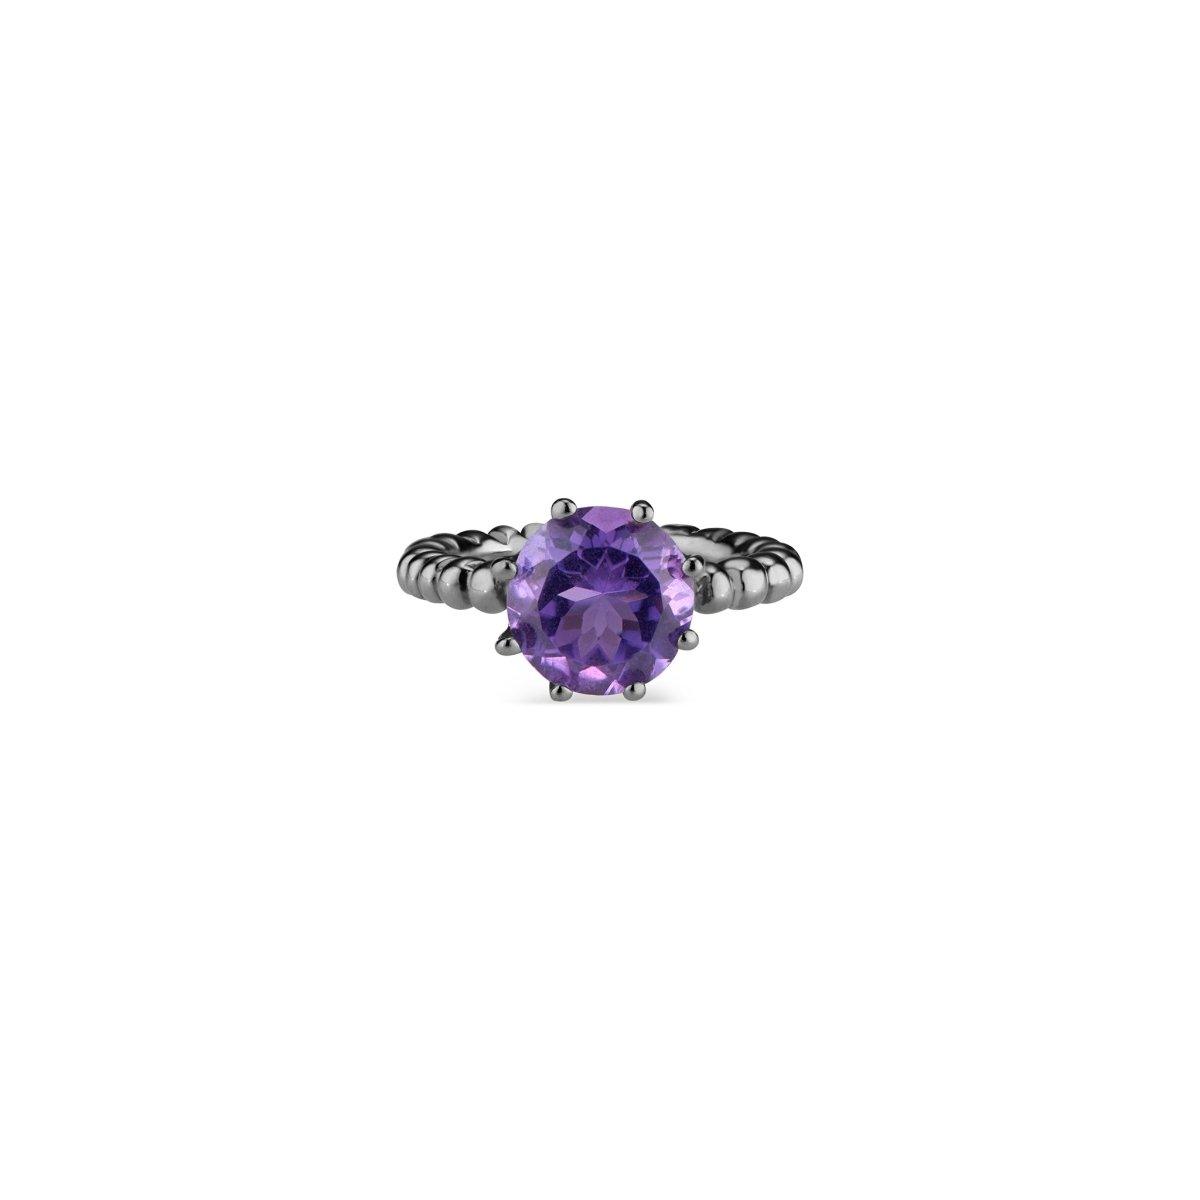 Amethyst Crown Ring - Nataly Aponte